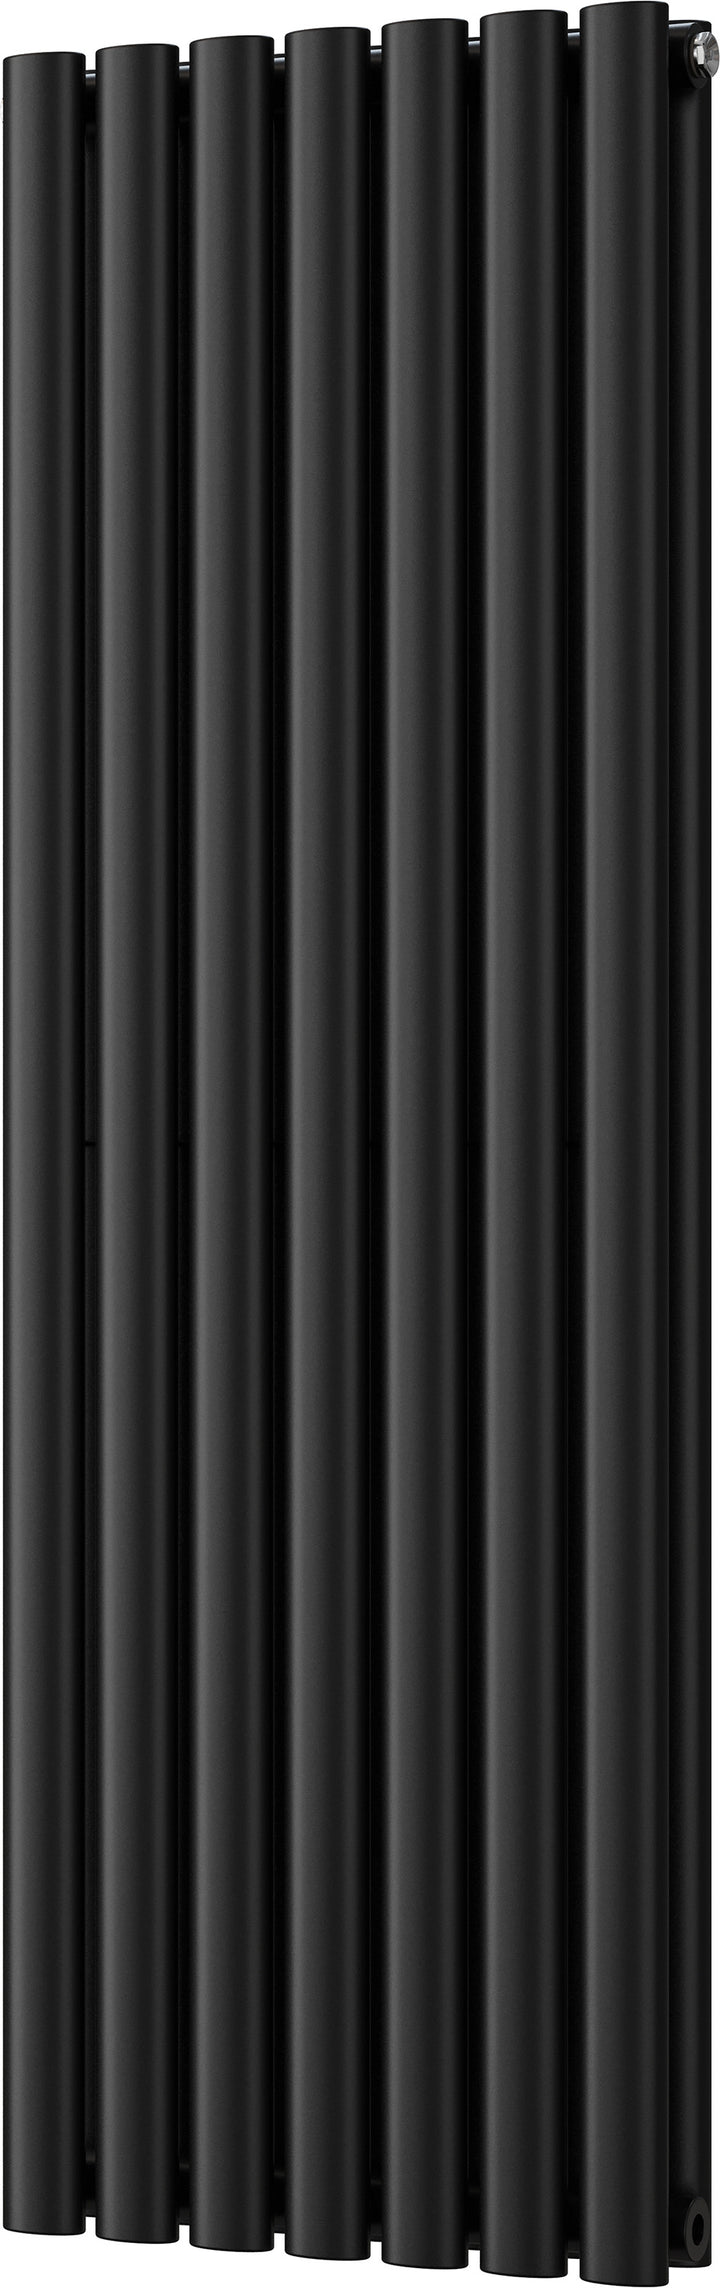 Omeara - Black Vertical Radiator H1200mm x W406mm Double Panel